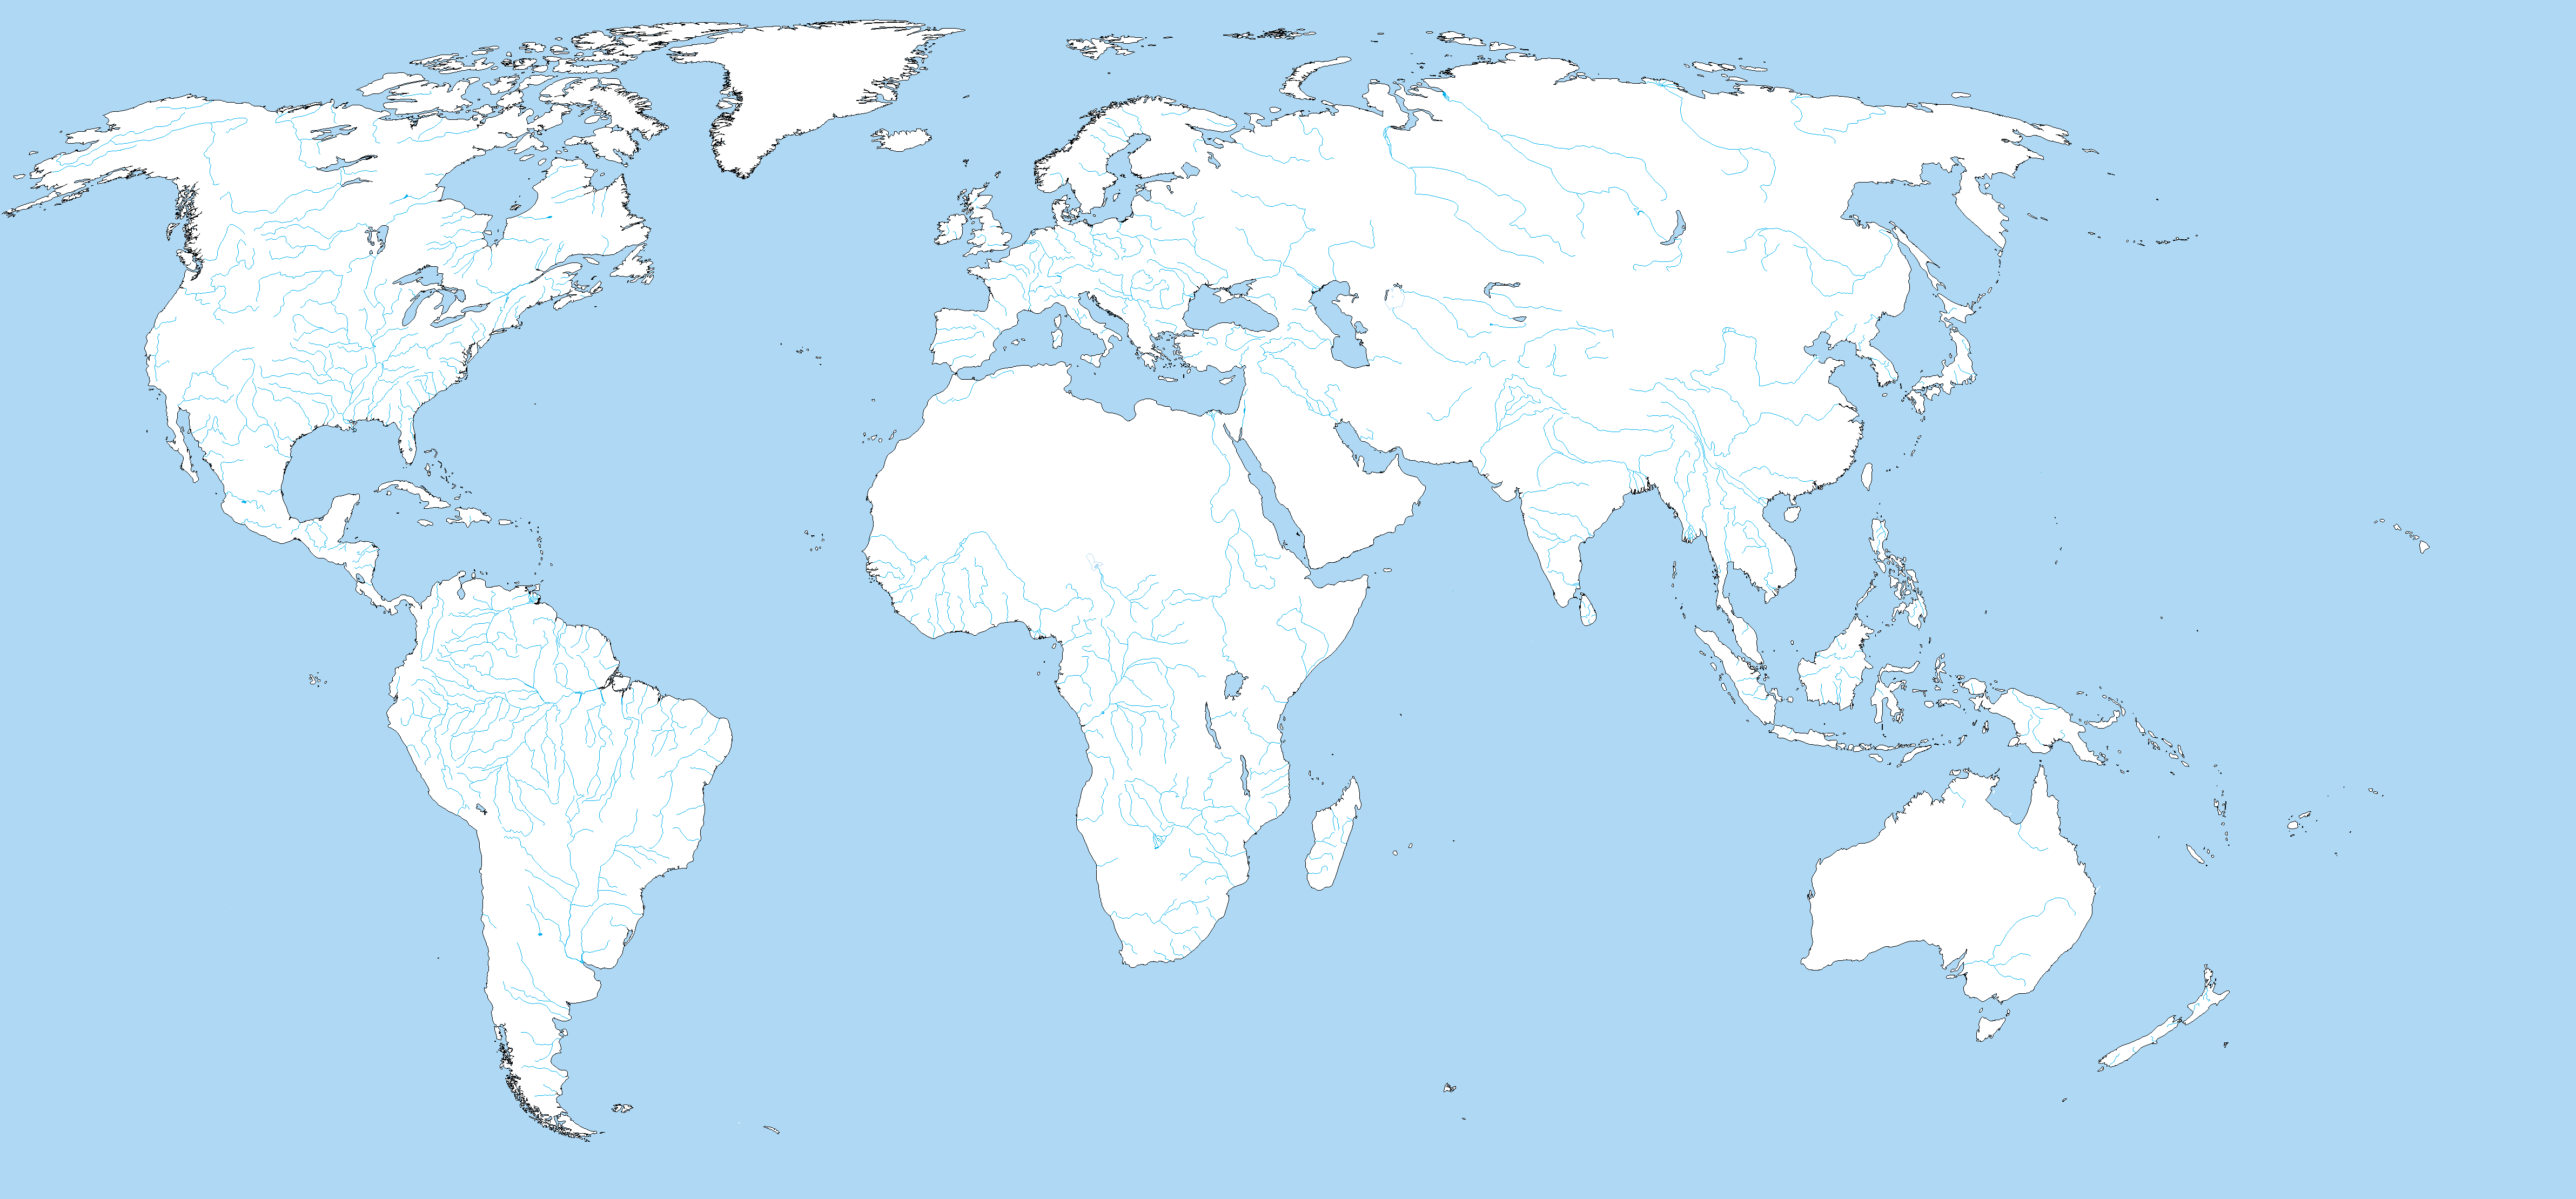 blank-map-of-the-world-with-major-rivers-major-world-rivers-outline